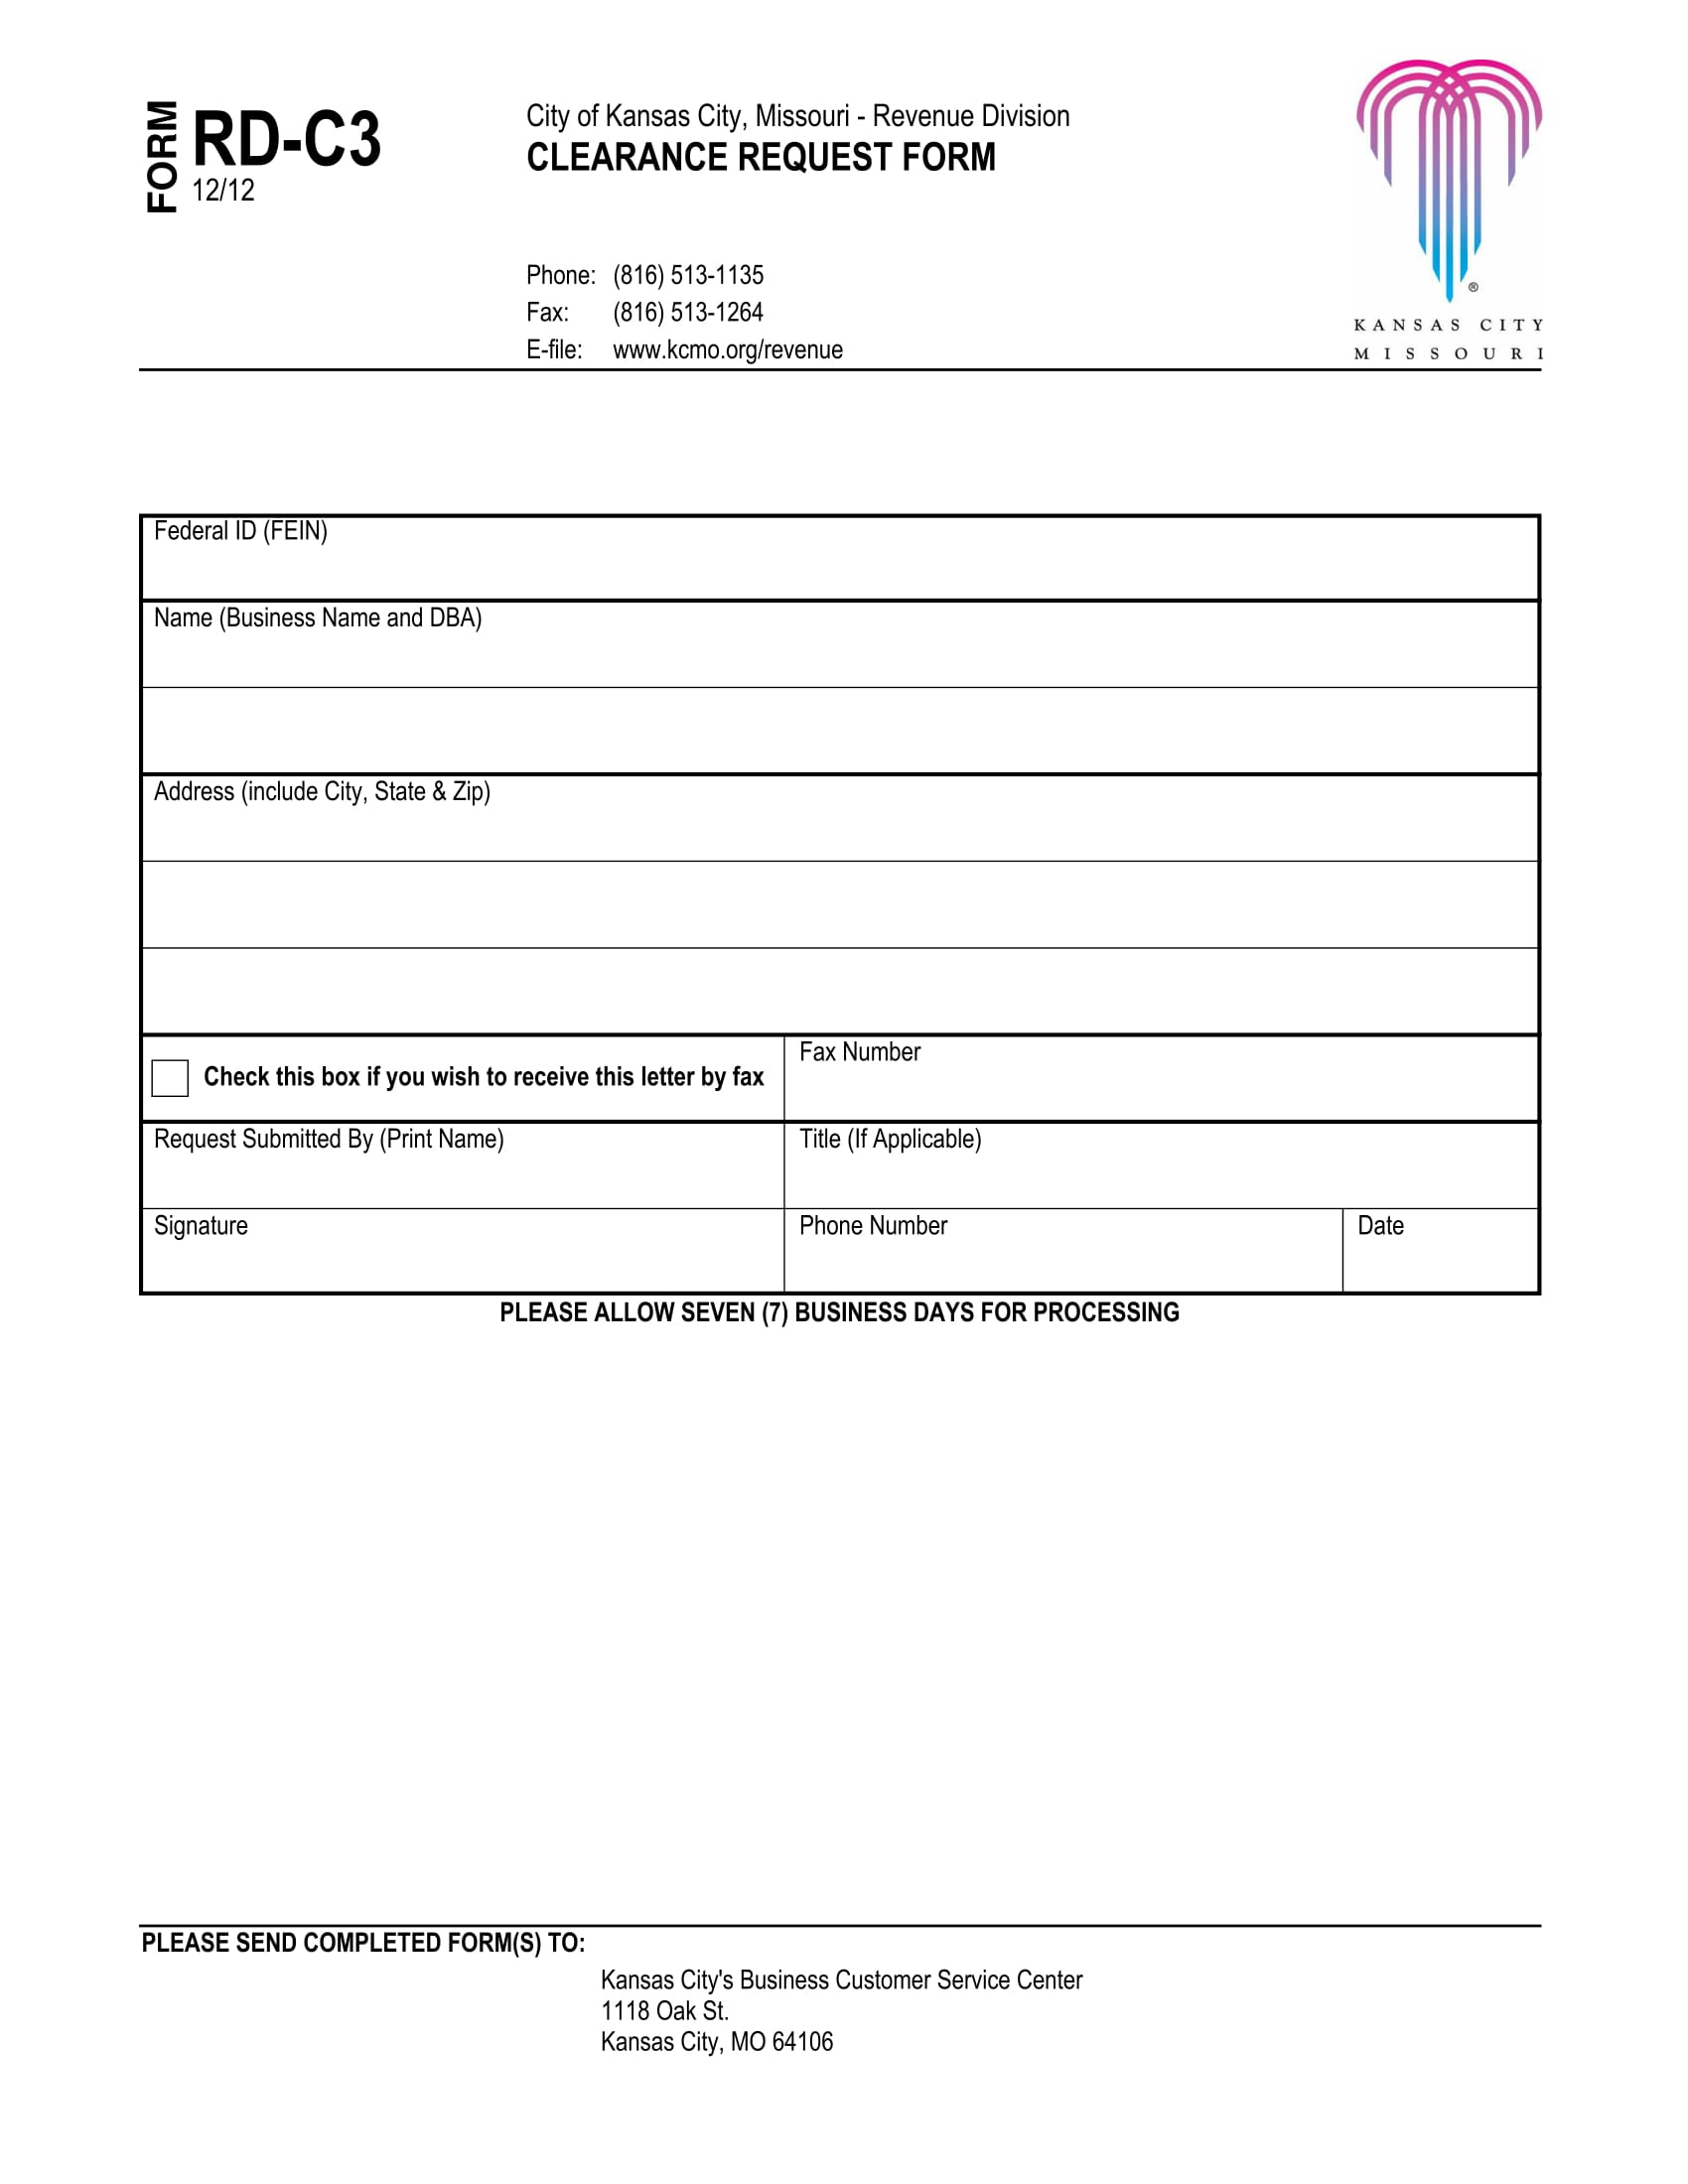 business clearance request form 1